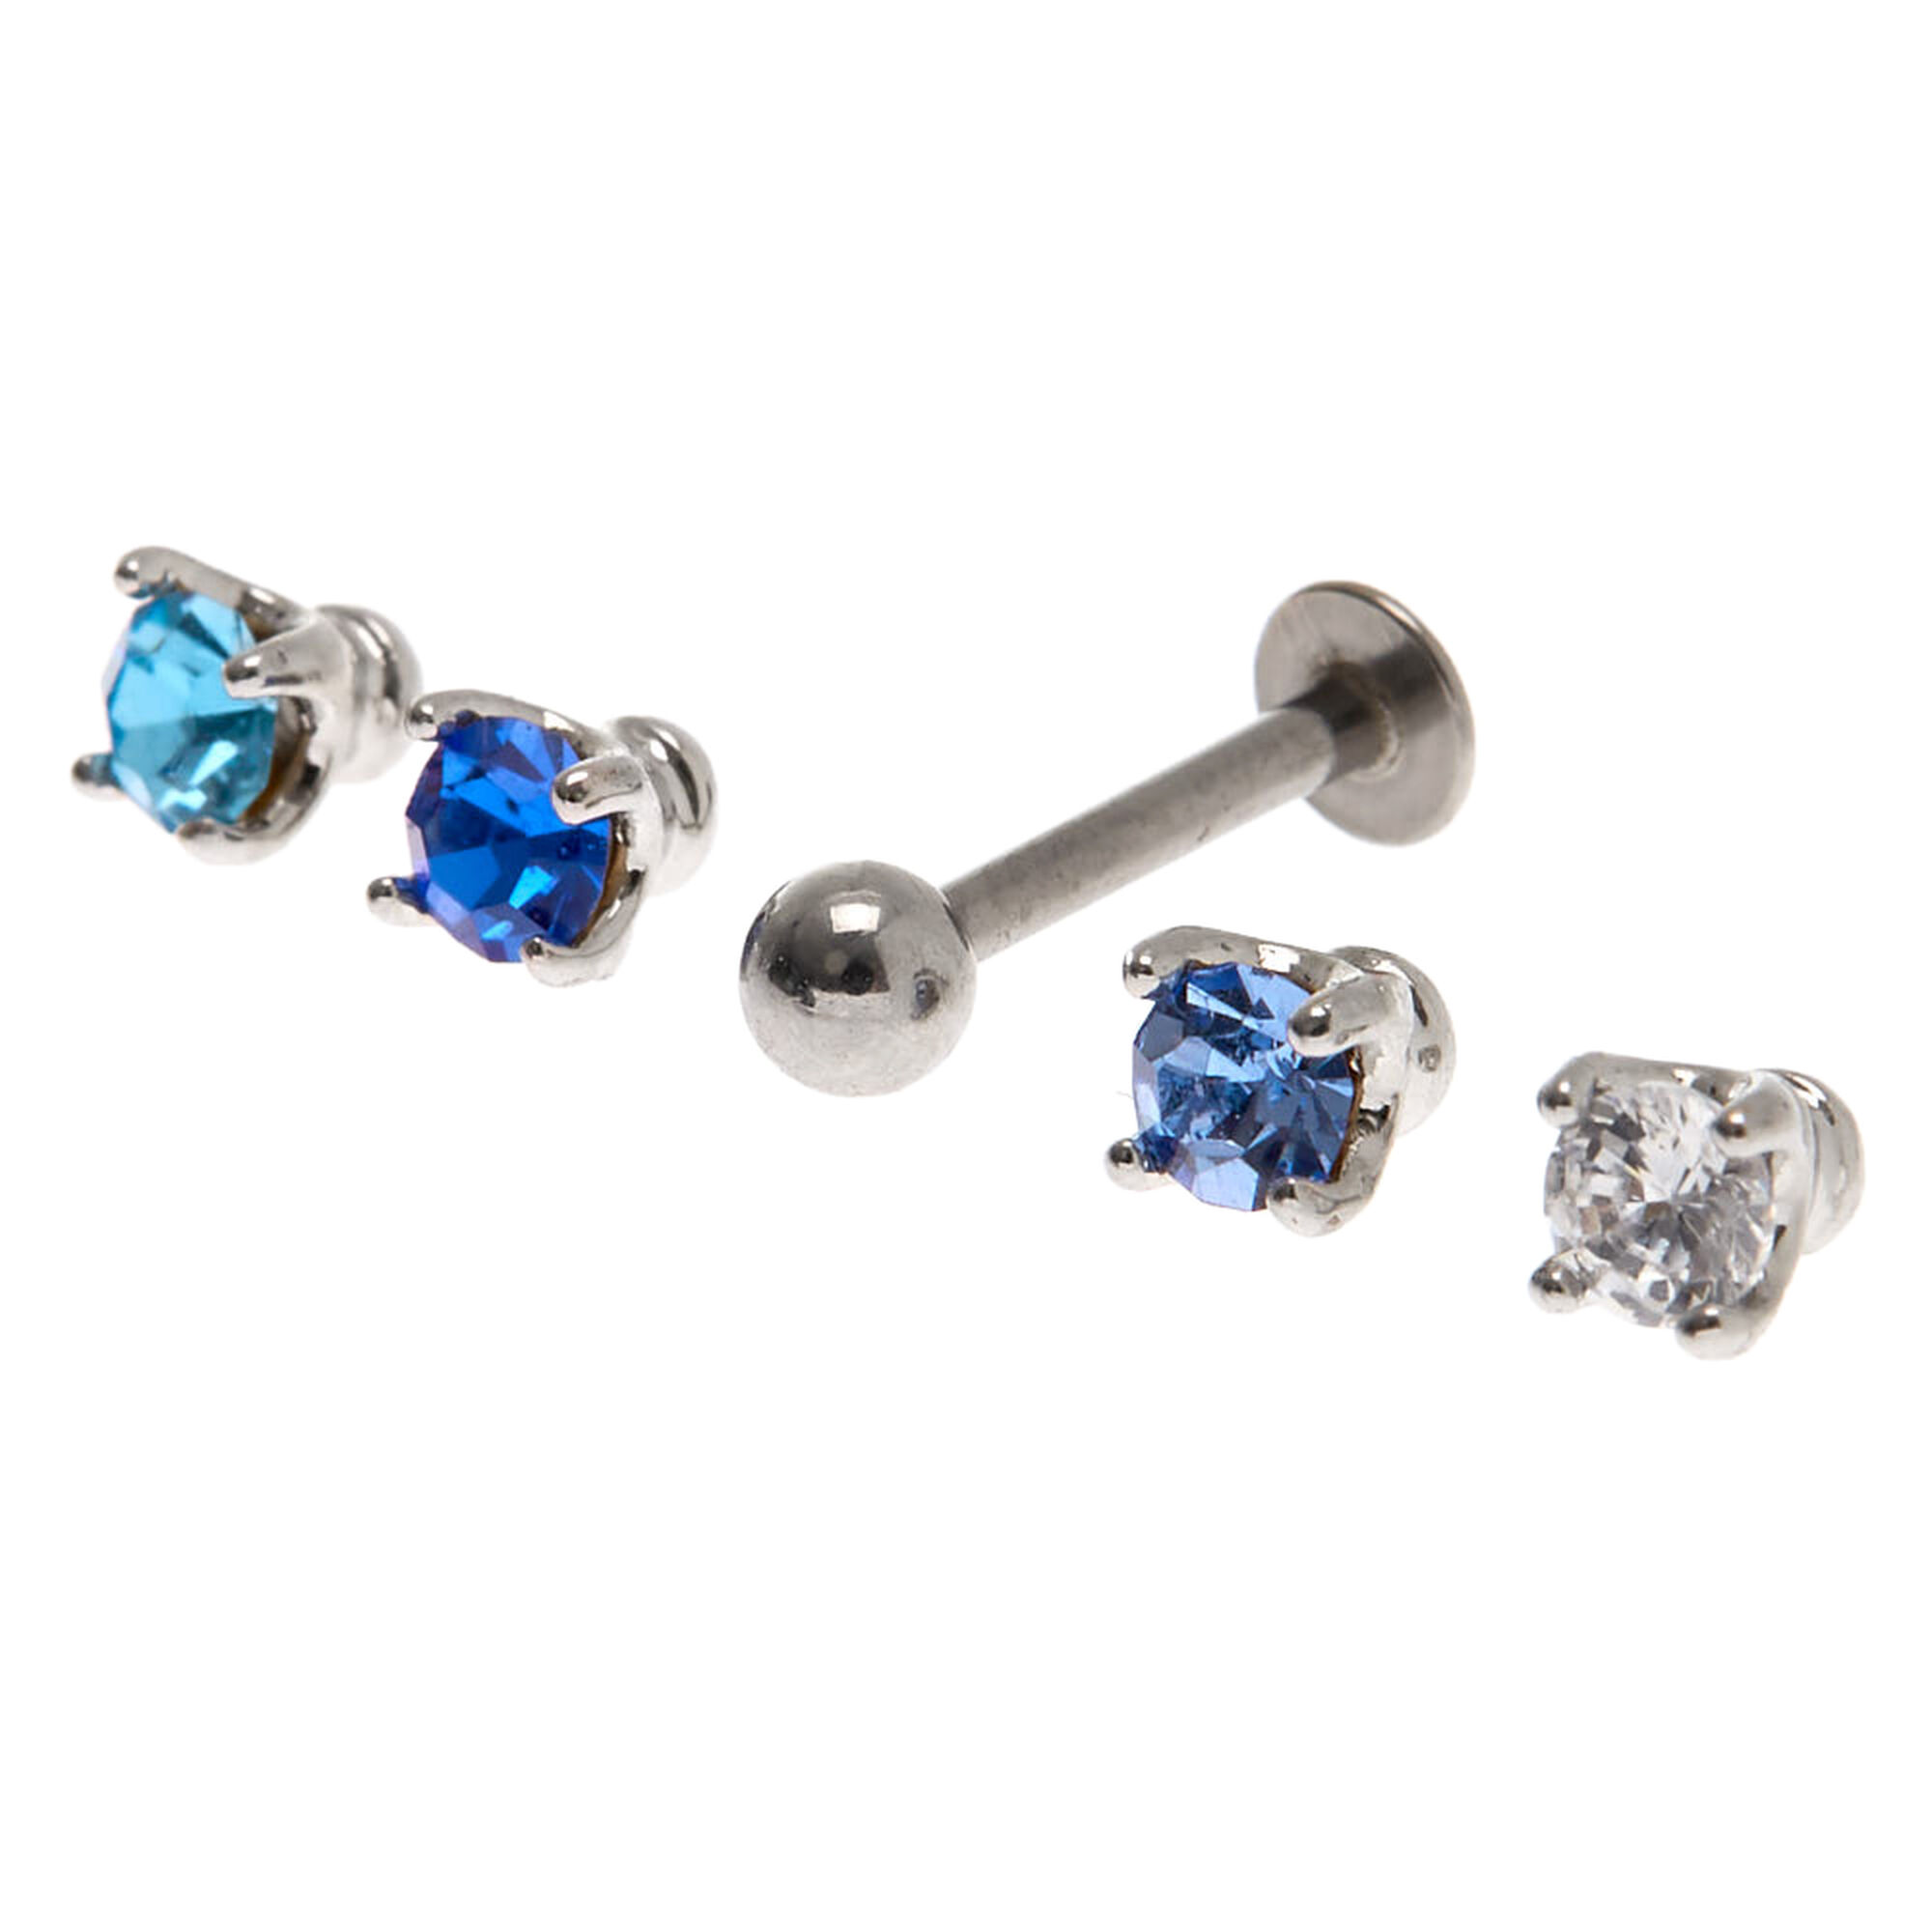 View Claires 16G Multi Crystal Changeable Tragus Flat Back Earrings 5 Pack Blue information